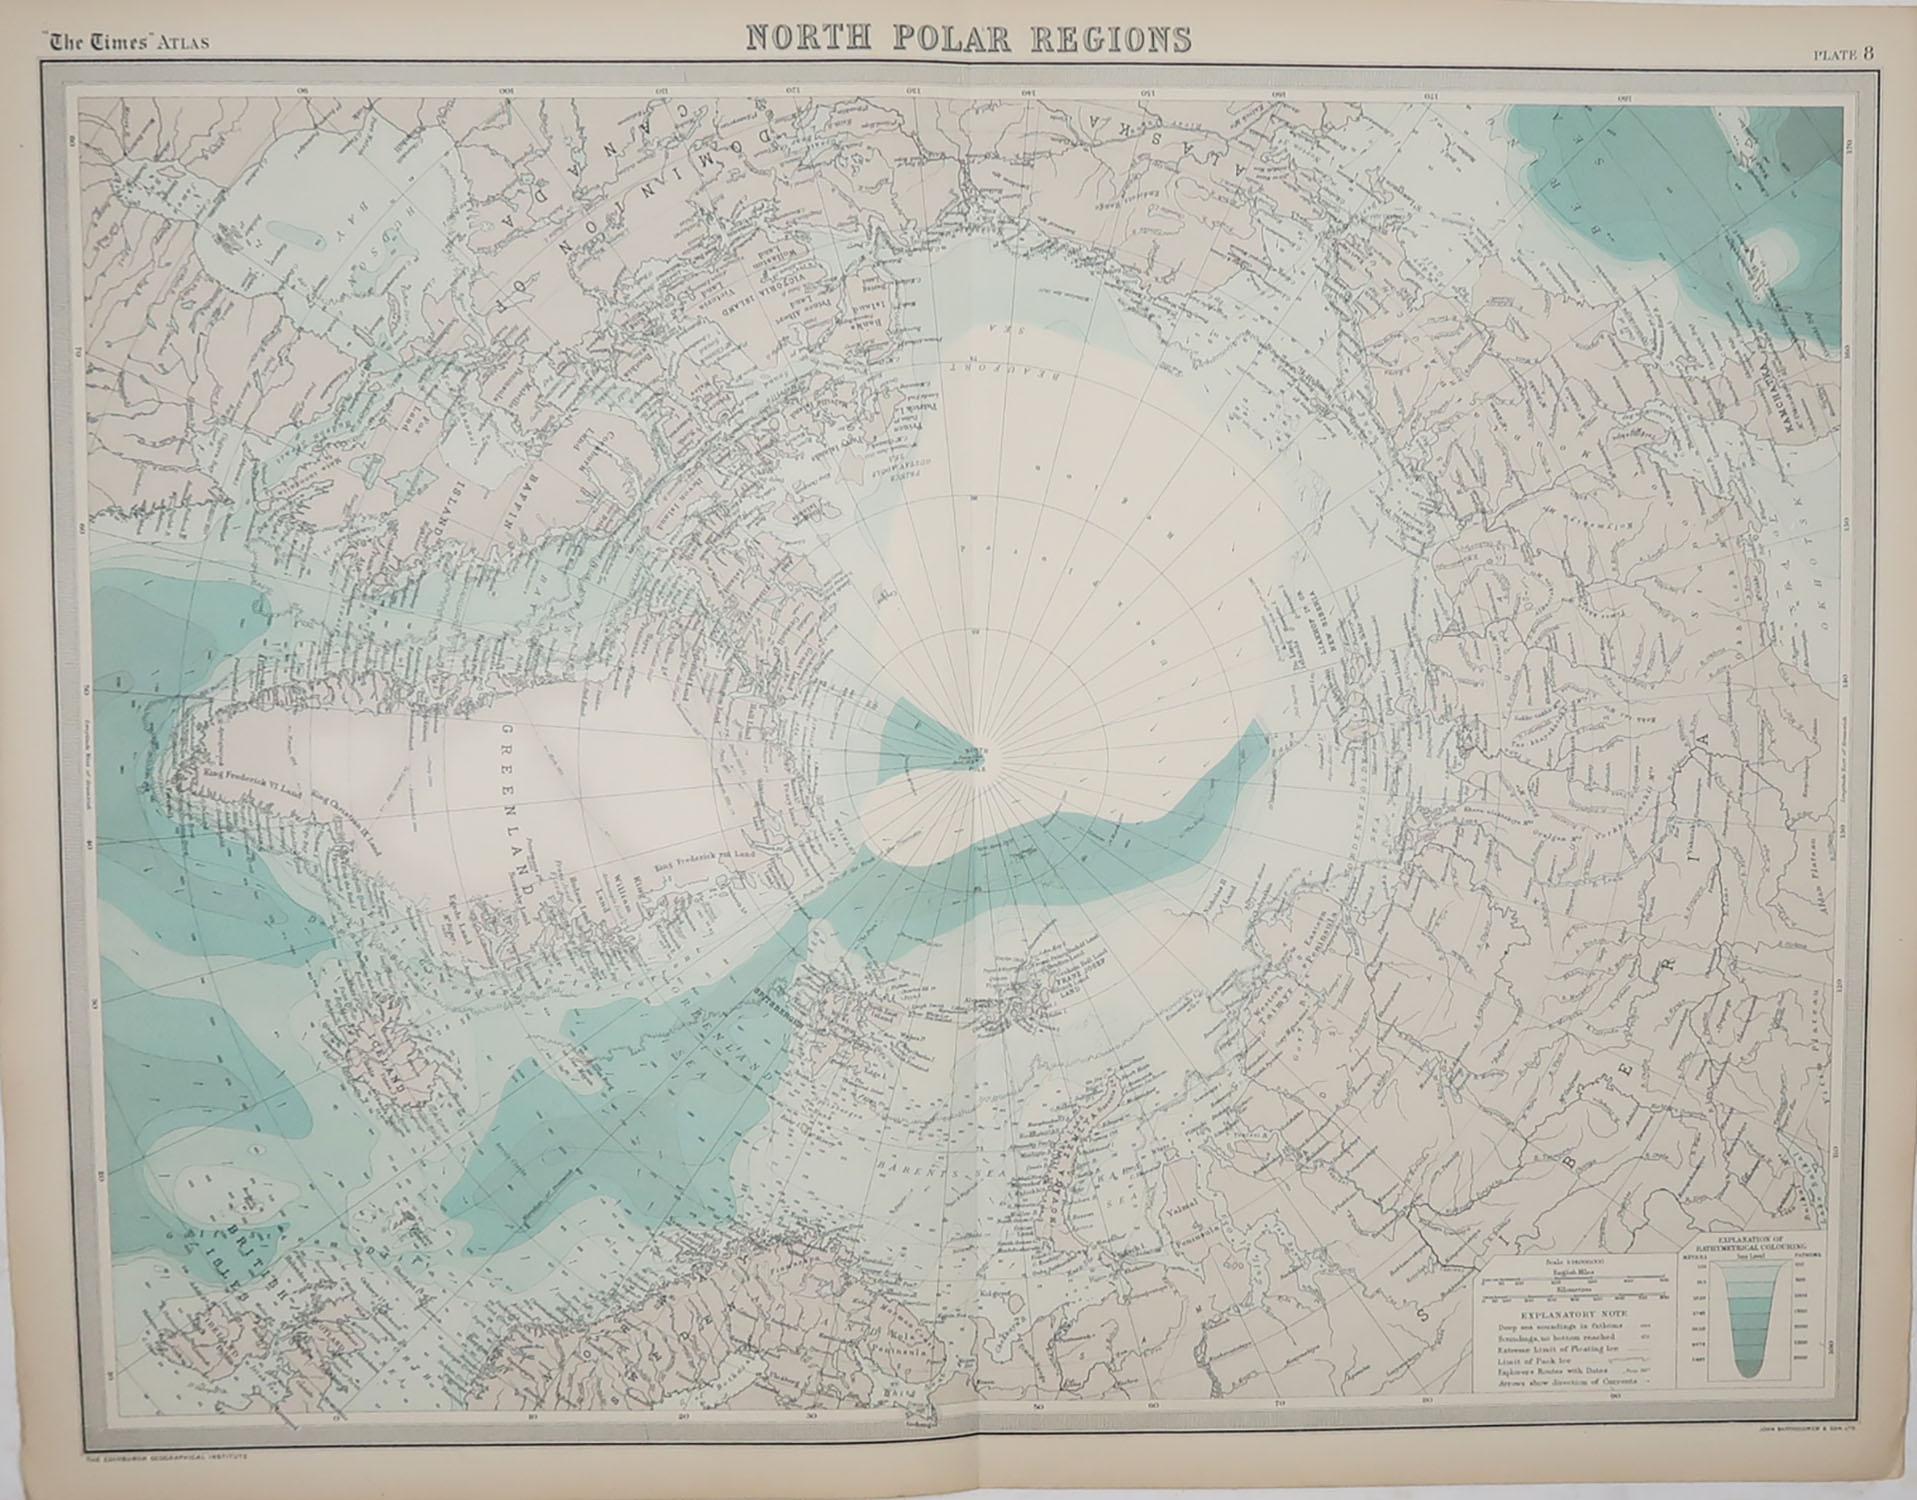 Great maps of The North Pole

Unframed

Original color

By John Bartholomew and Co. Edinburgh Geographical Institute

Published, circa 1920

Free shipping.
  